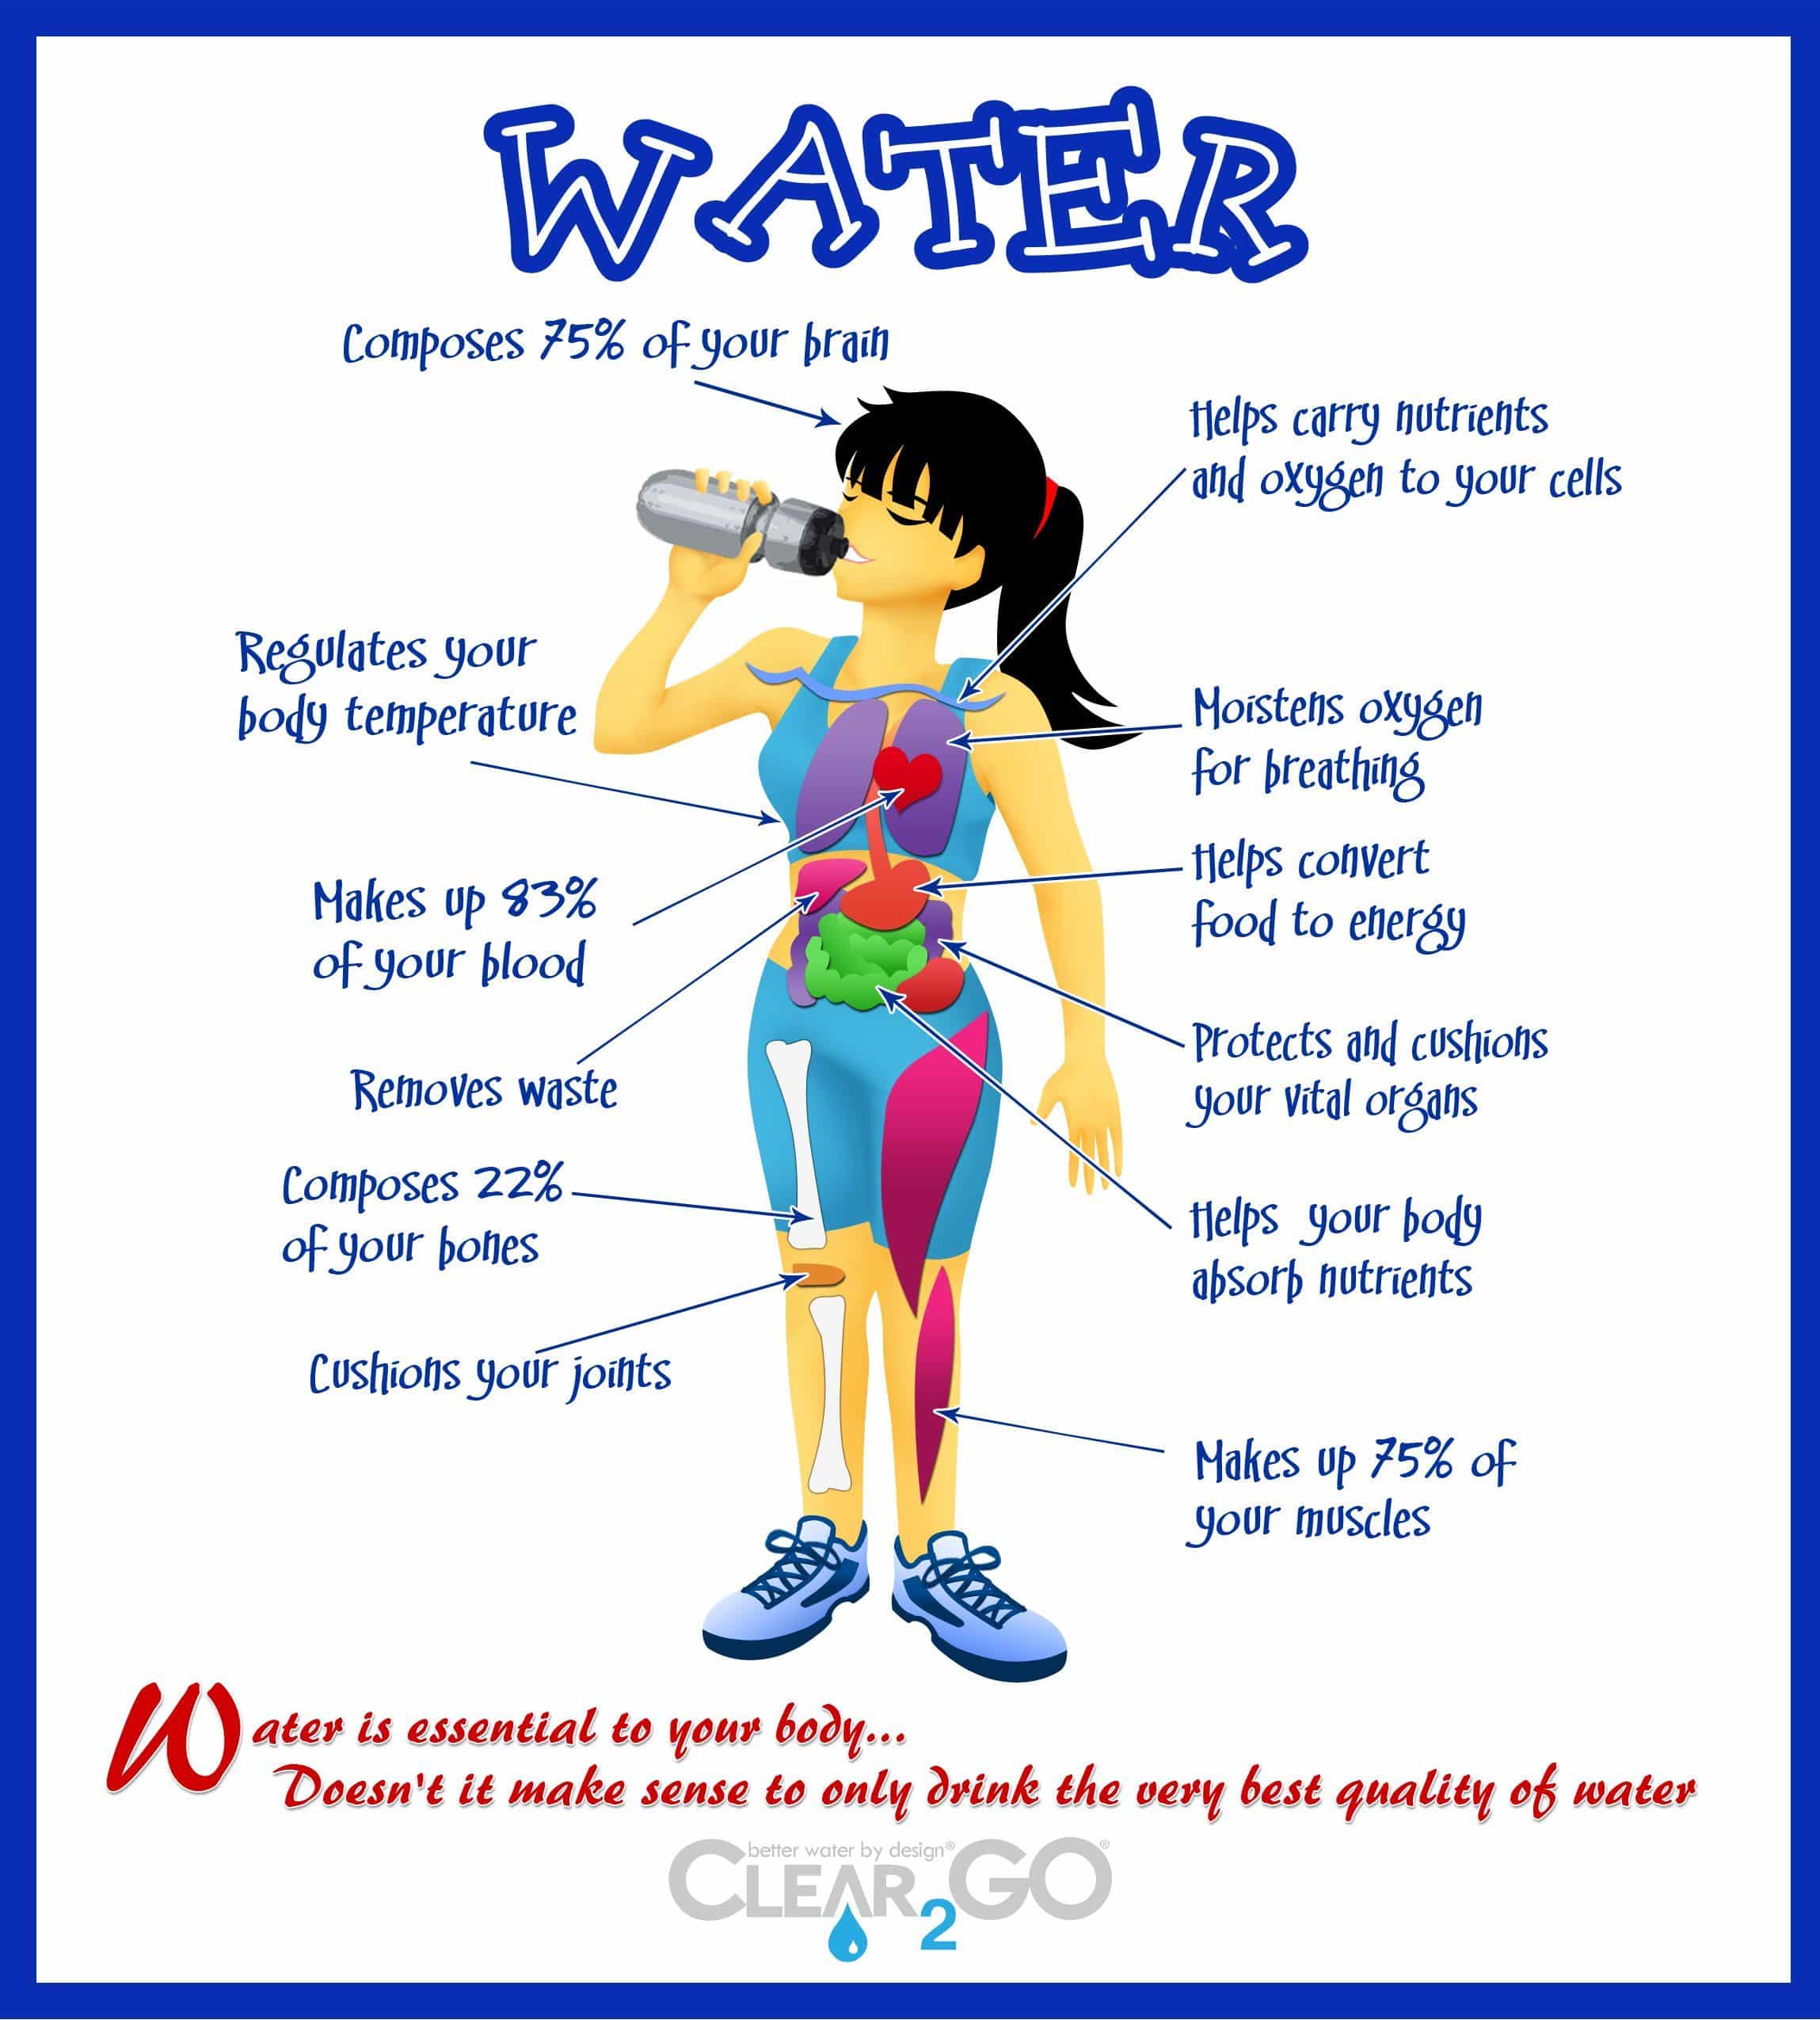 Benefits of Drinking Water.